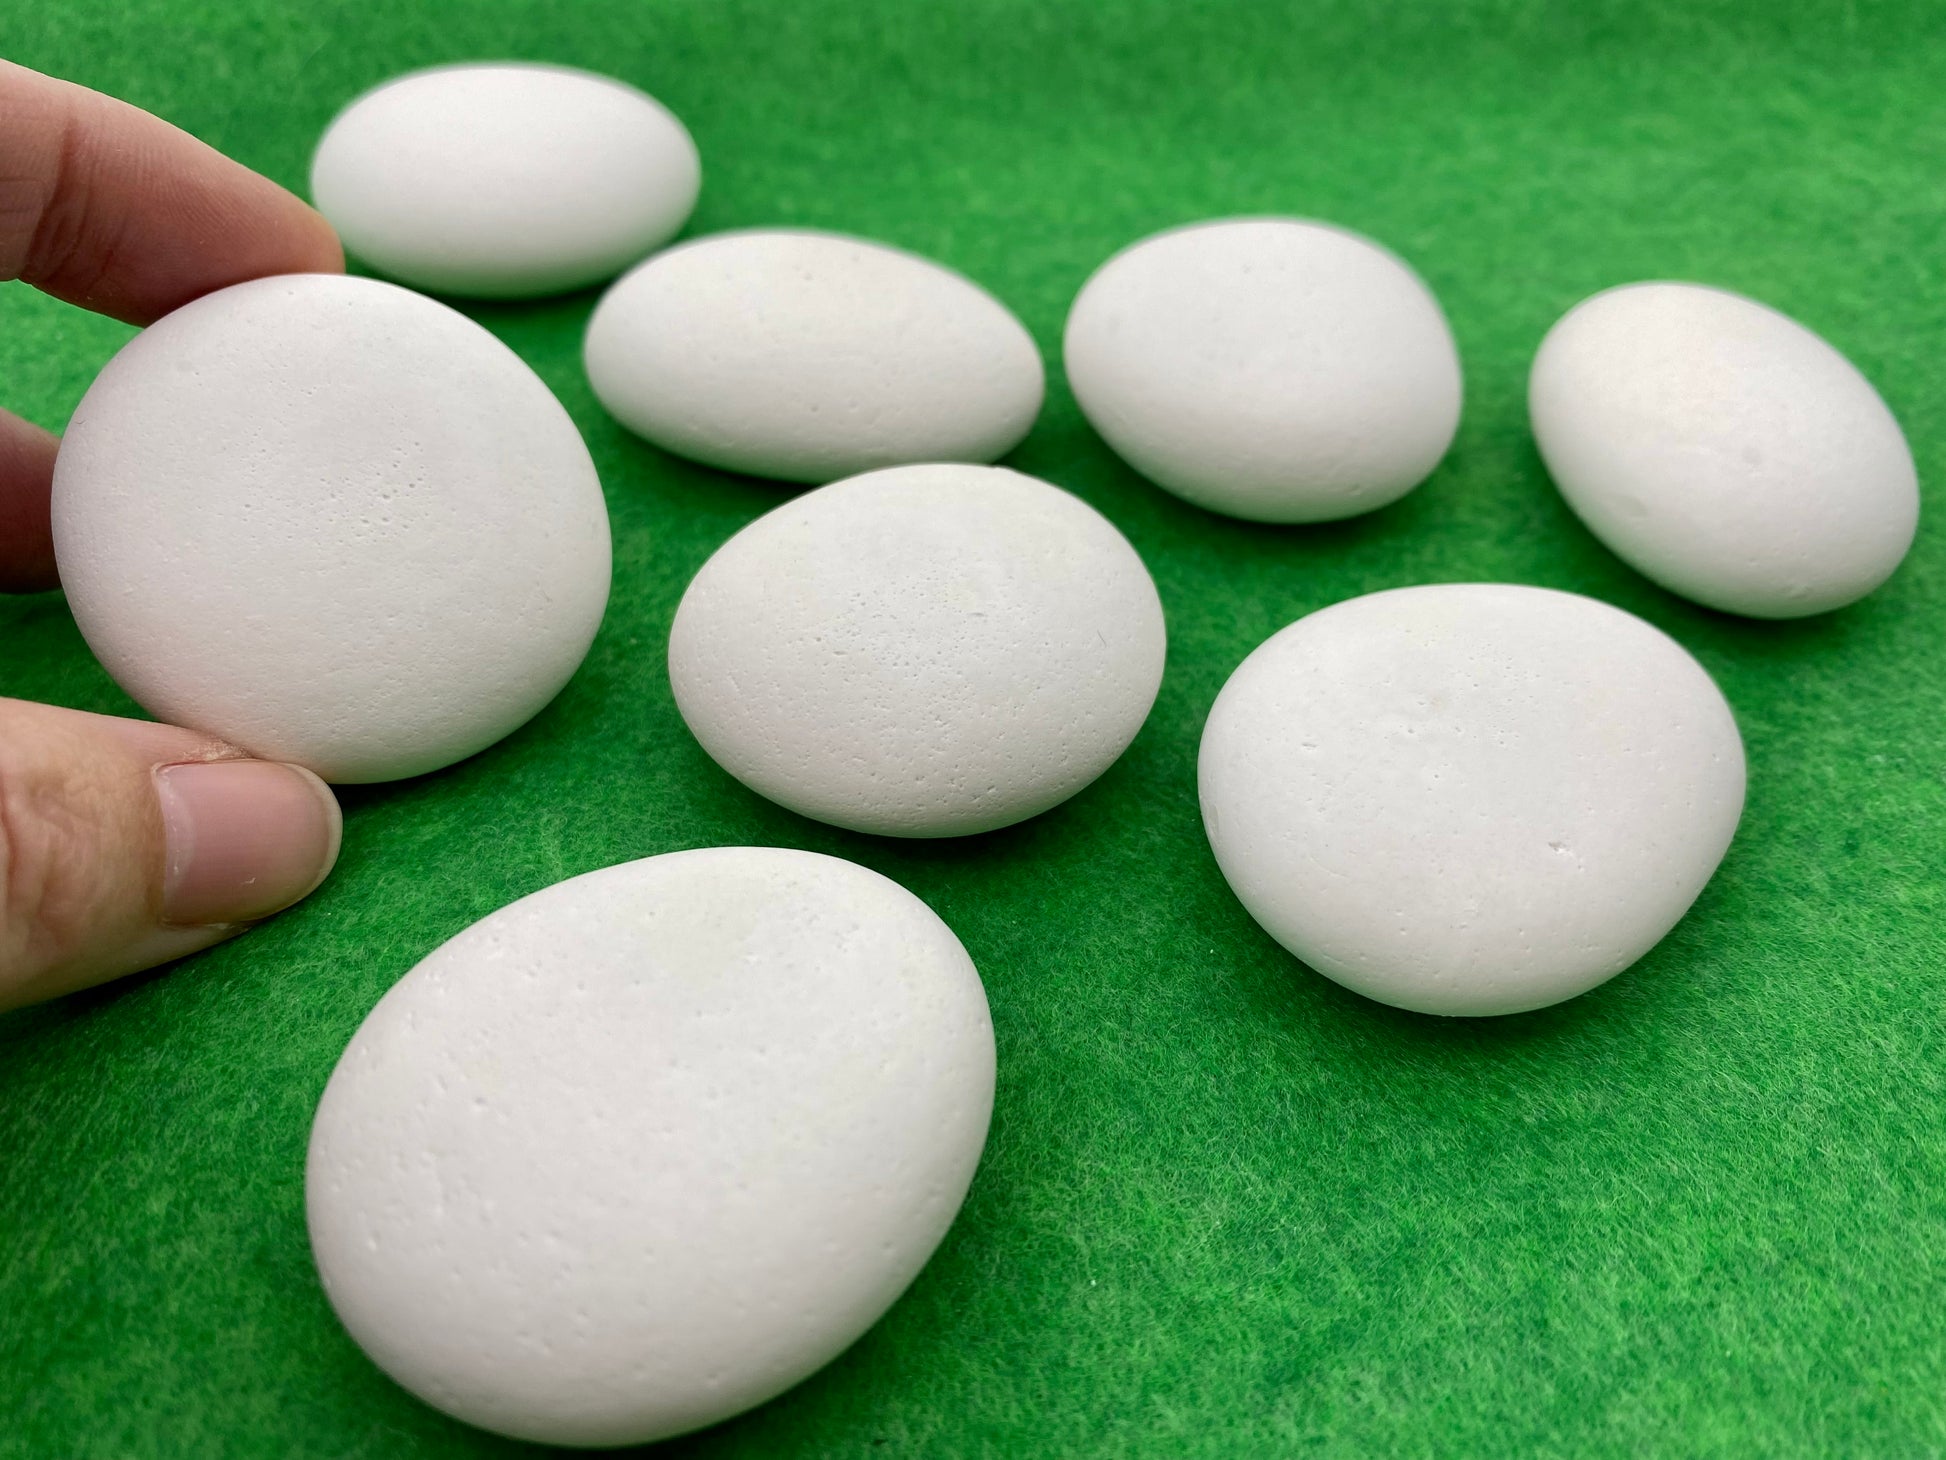 8 small white plaster pebbles of different shapes and sizes